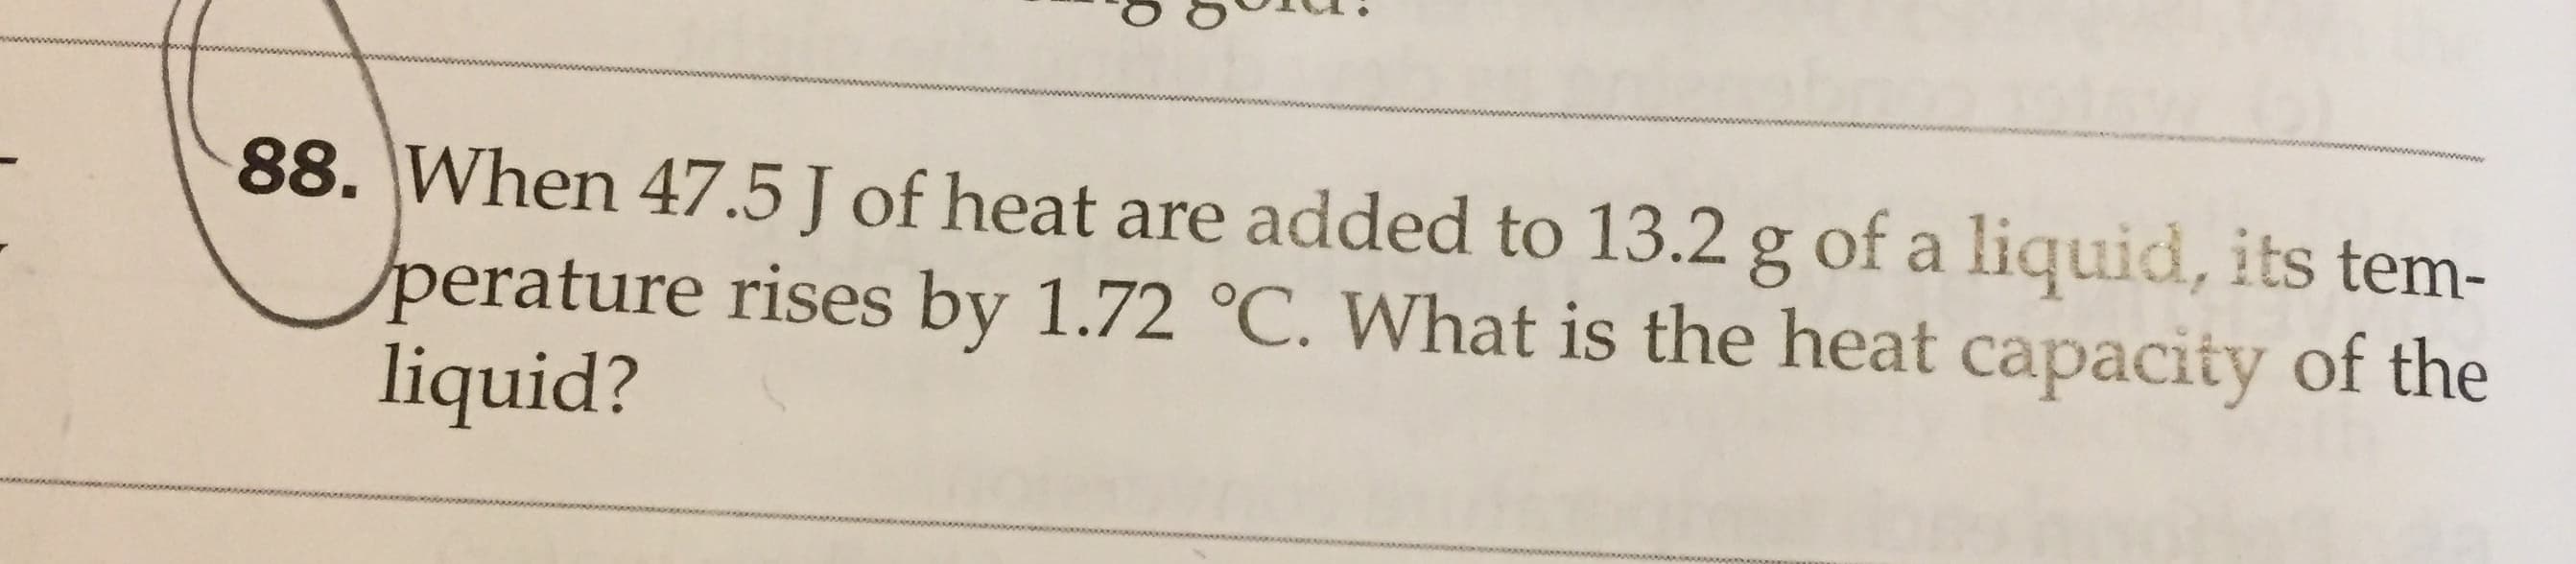 www
88. When 47.5 J of heat are added to 13.2 g of a liquid, its tem-
perature rises by 1.72 °C. What is the heat capacity of the
liquid?
